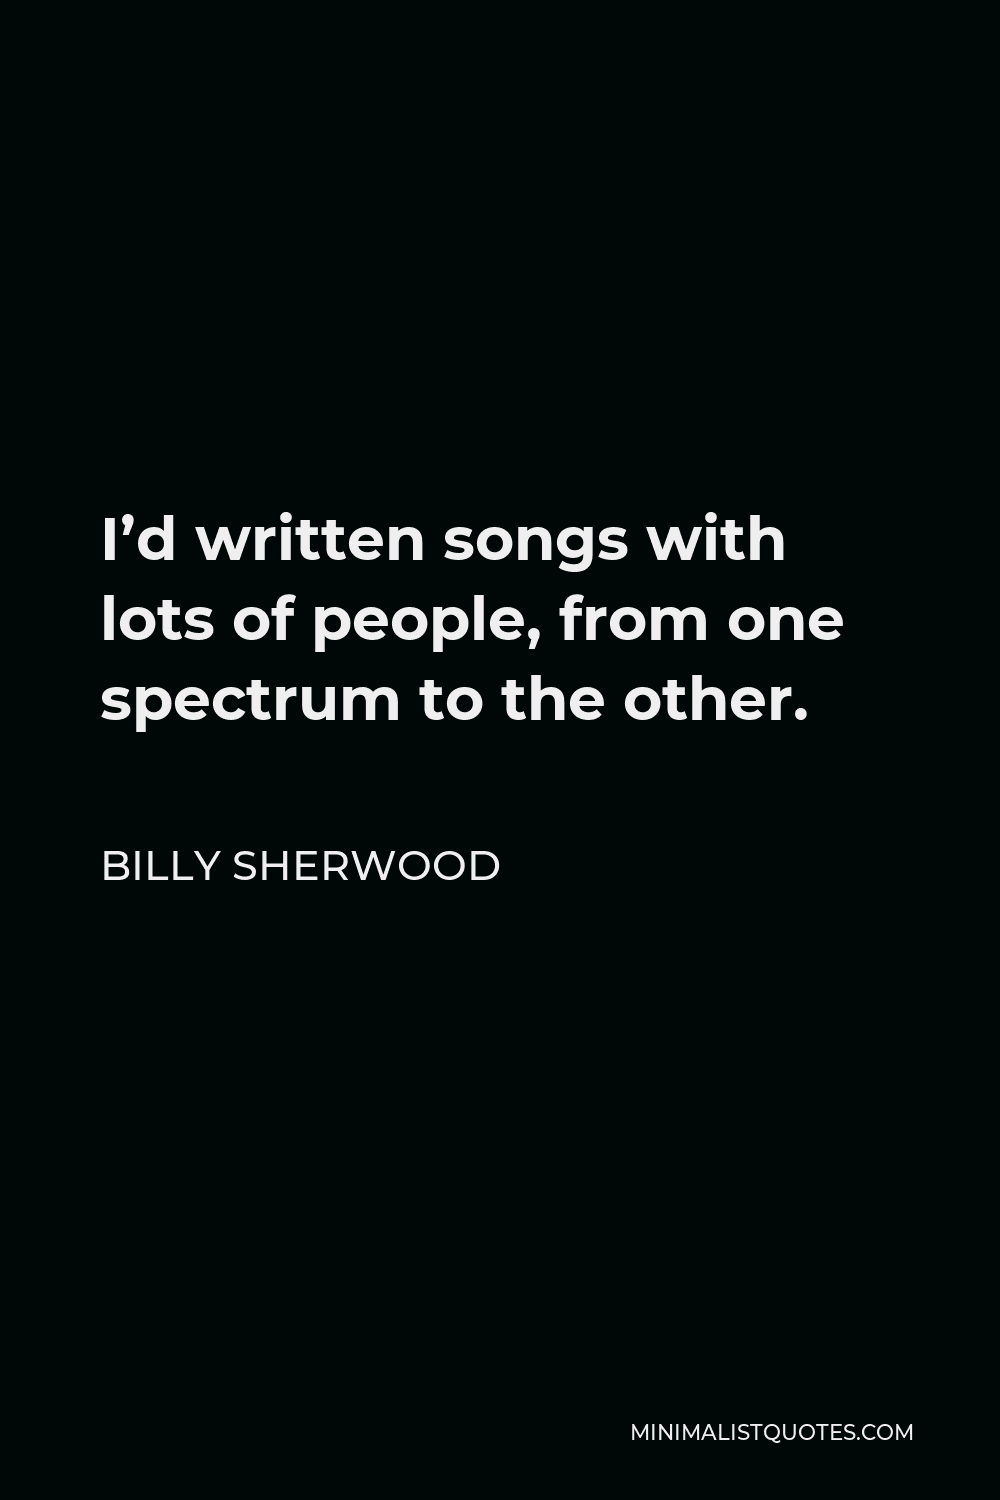 Billy Sherwood Quote - I’d written songs with lots of people, from one spectrum to the other.